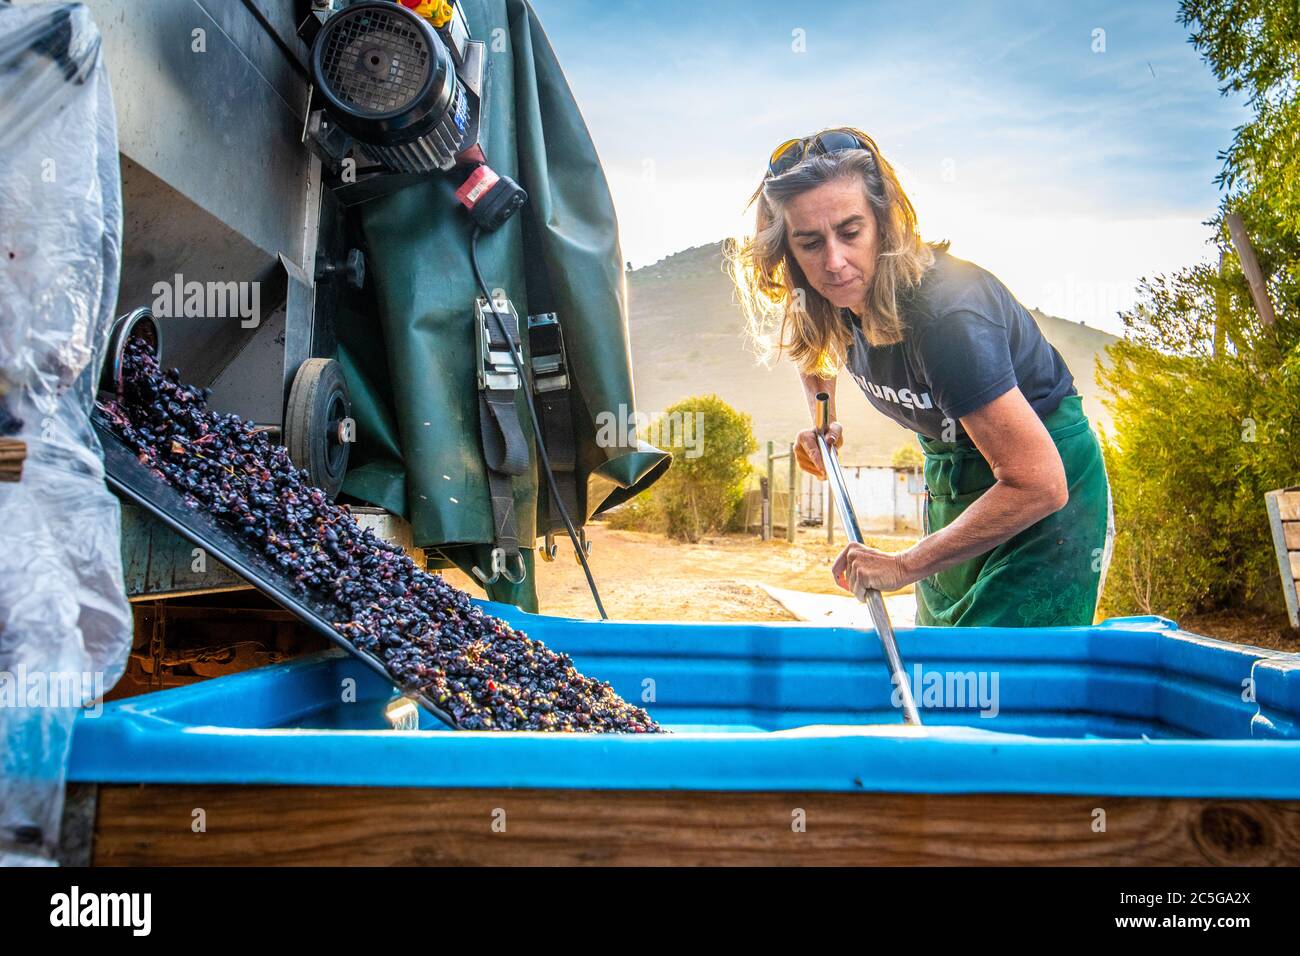 Grapes Being Processed at the Black Pearl Winery, Paarl, Western Cape, South Africa Stock Photo